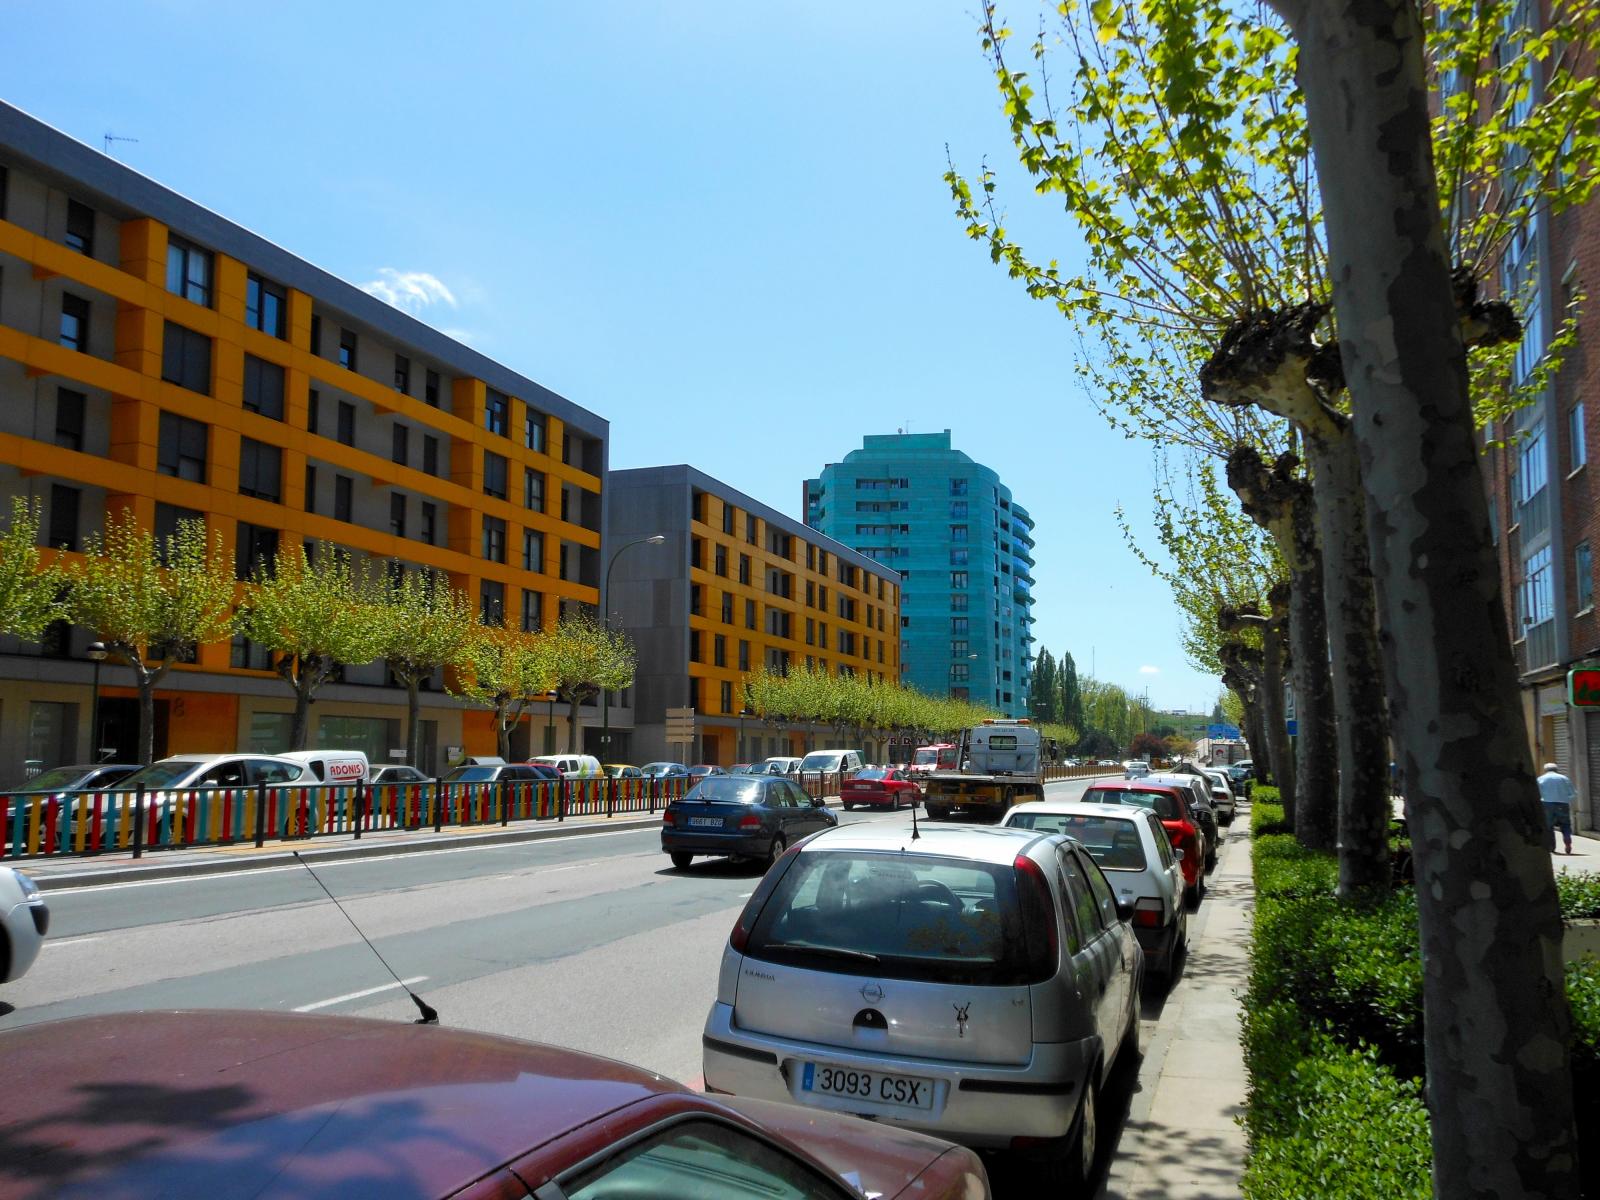 a busy street that has parked cars along one side and multiple colorful buildings behind the cars